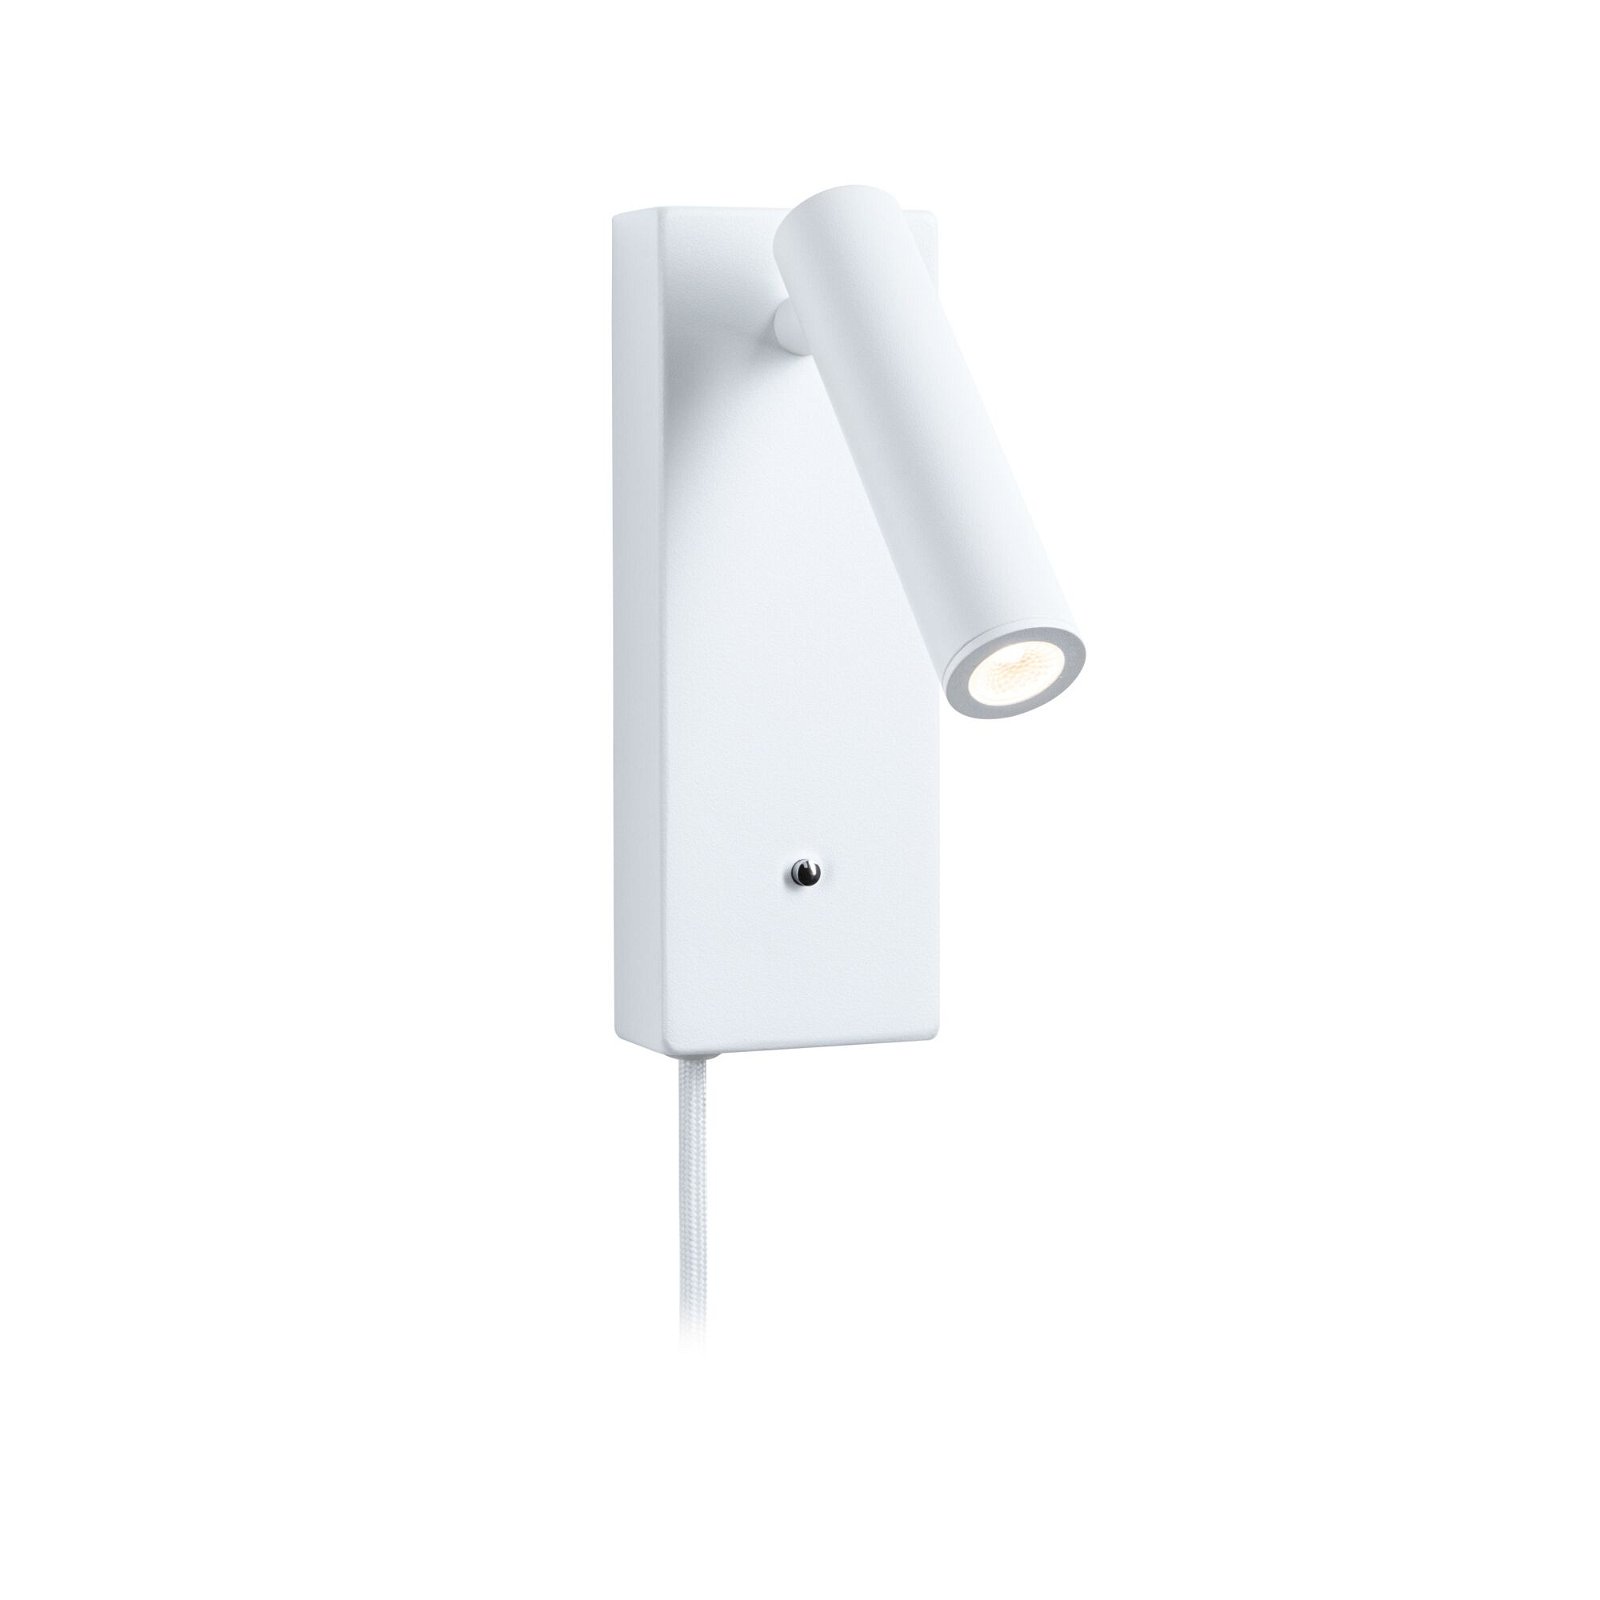 mengcaca LED Wall Sconces, Wall Mounted Reading Lights White with